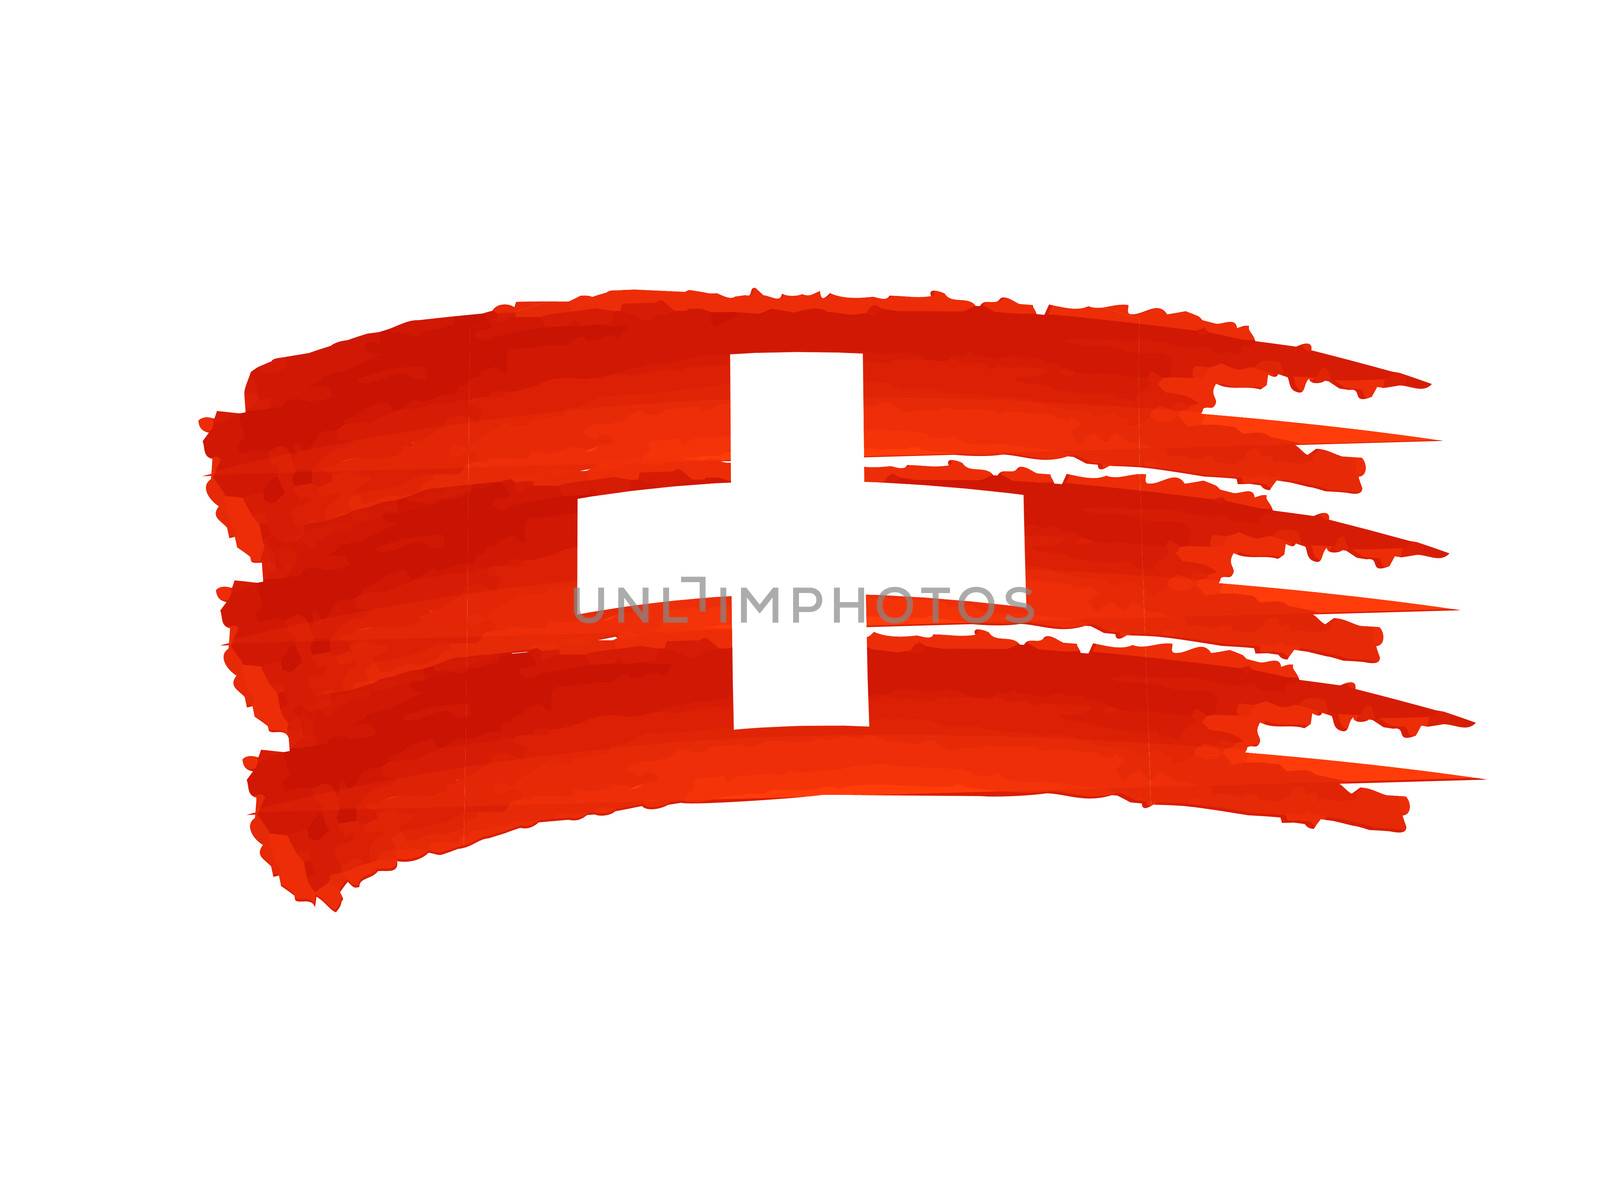 Illustration of Isolated hand drawn Swiss flag